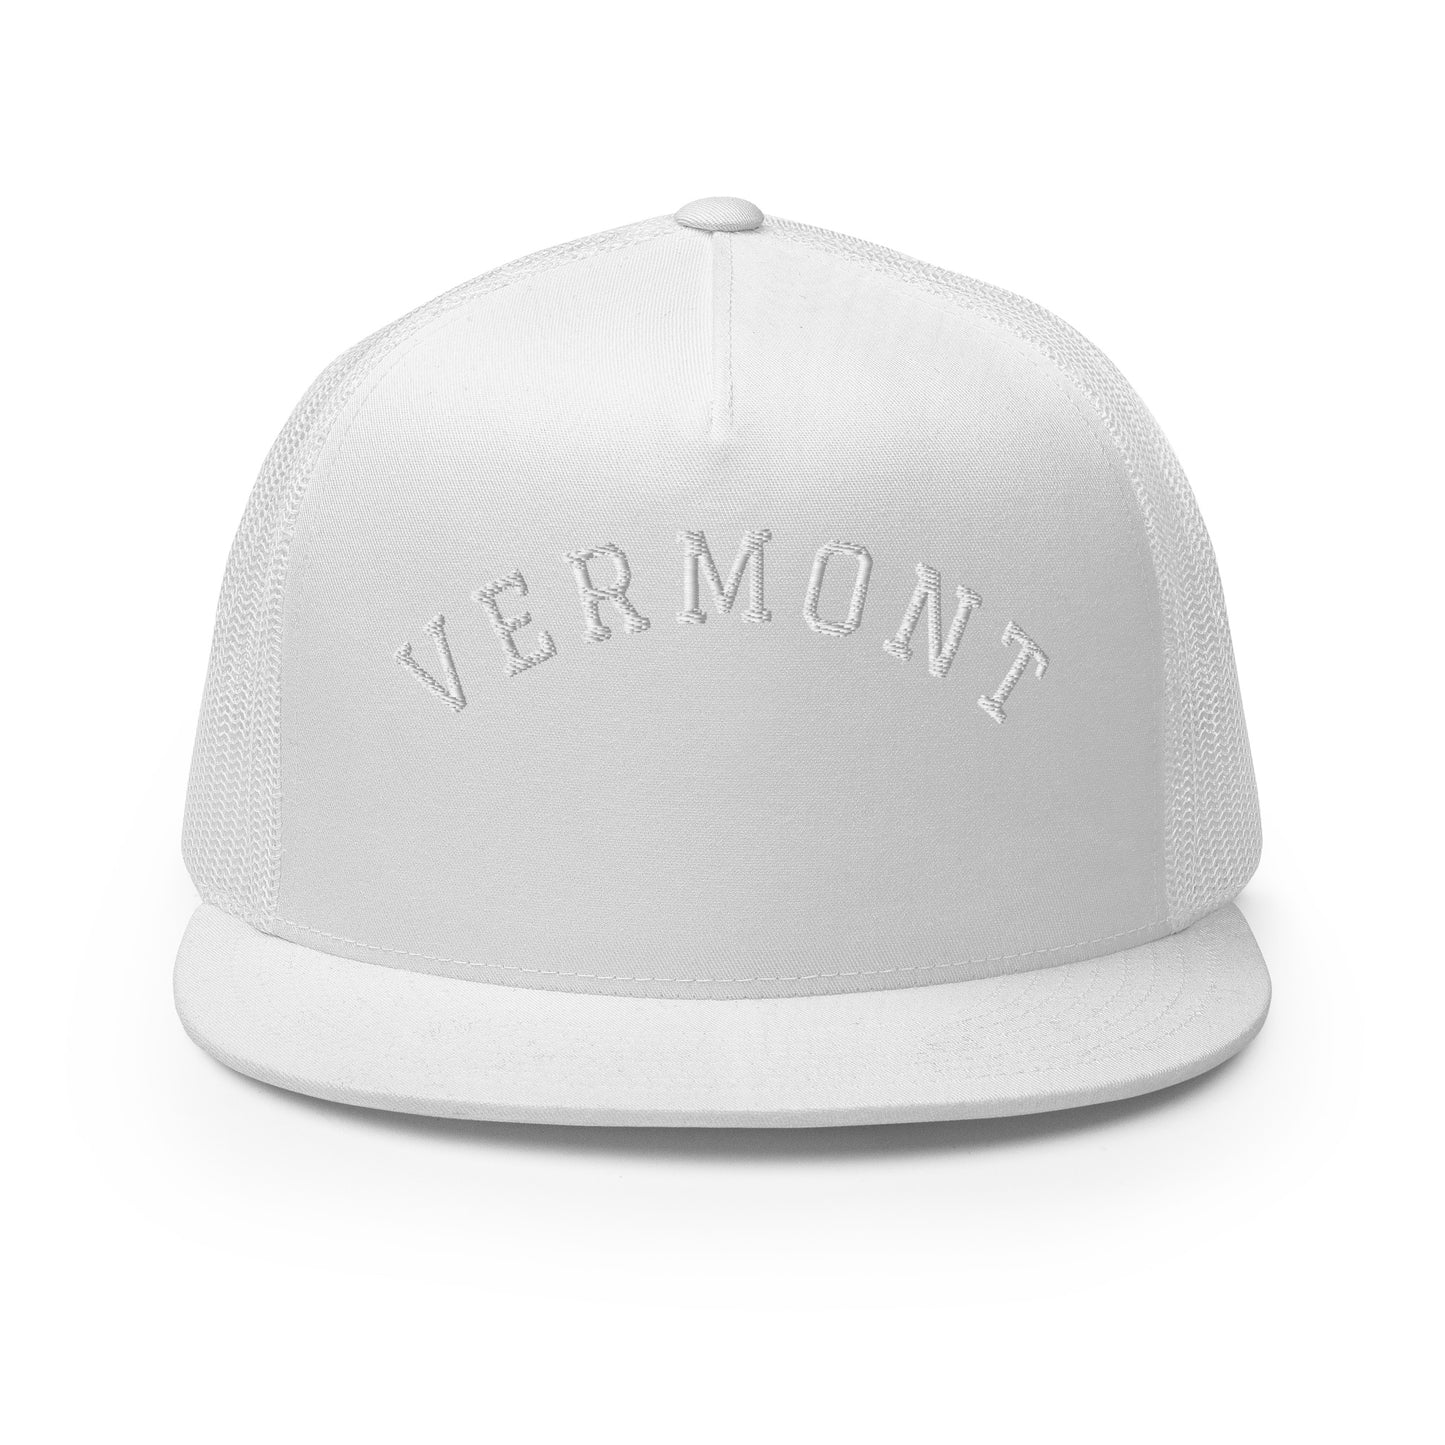 Vermont Arch High 5 Panel A-Frame Snapback Trucker Hat